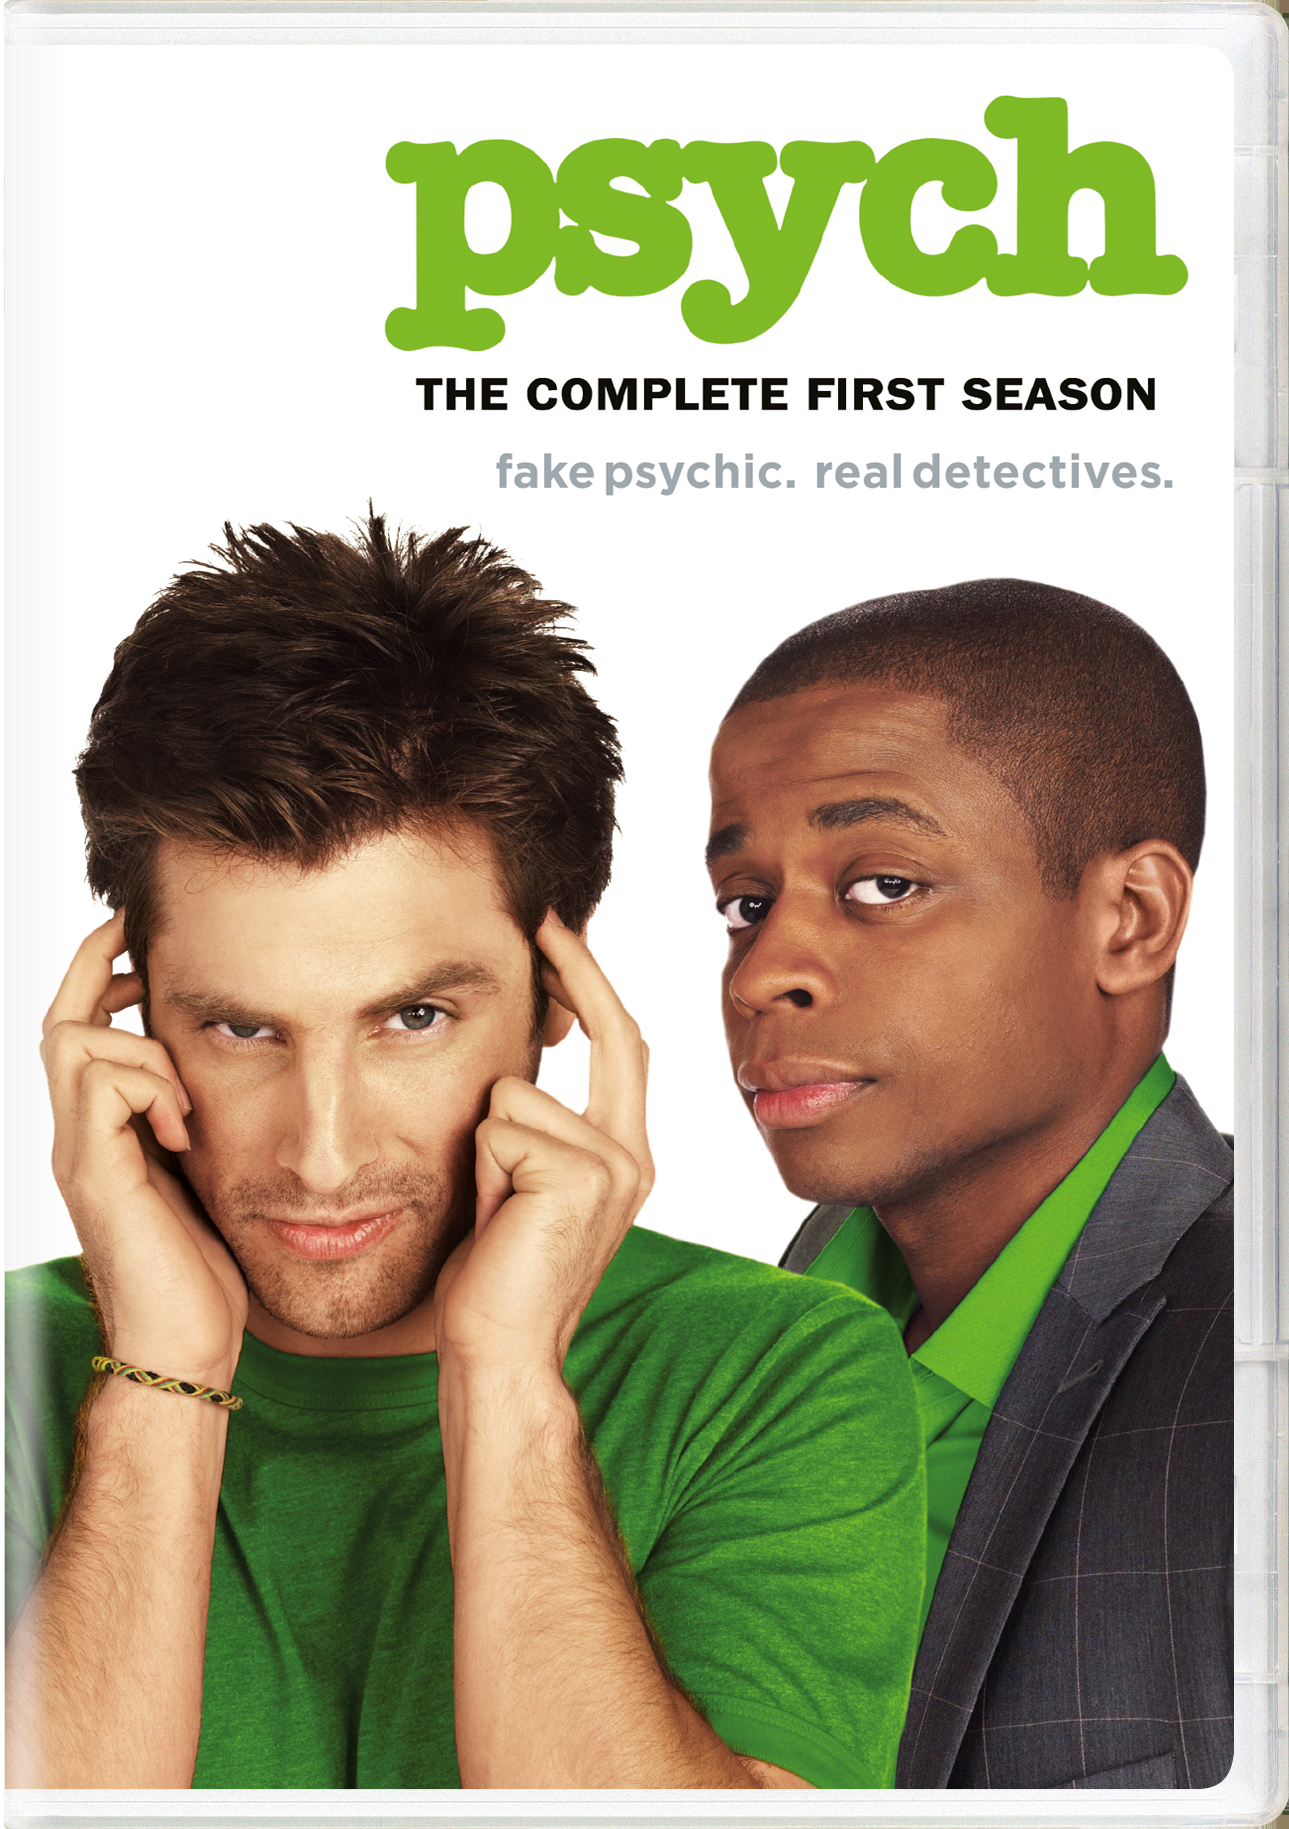 Psych: The Complete First Season - DVD [ 2006 ]  - Comedy Television On DVD - TV Shows On GRUV